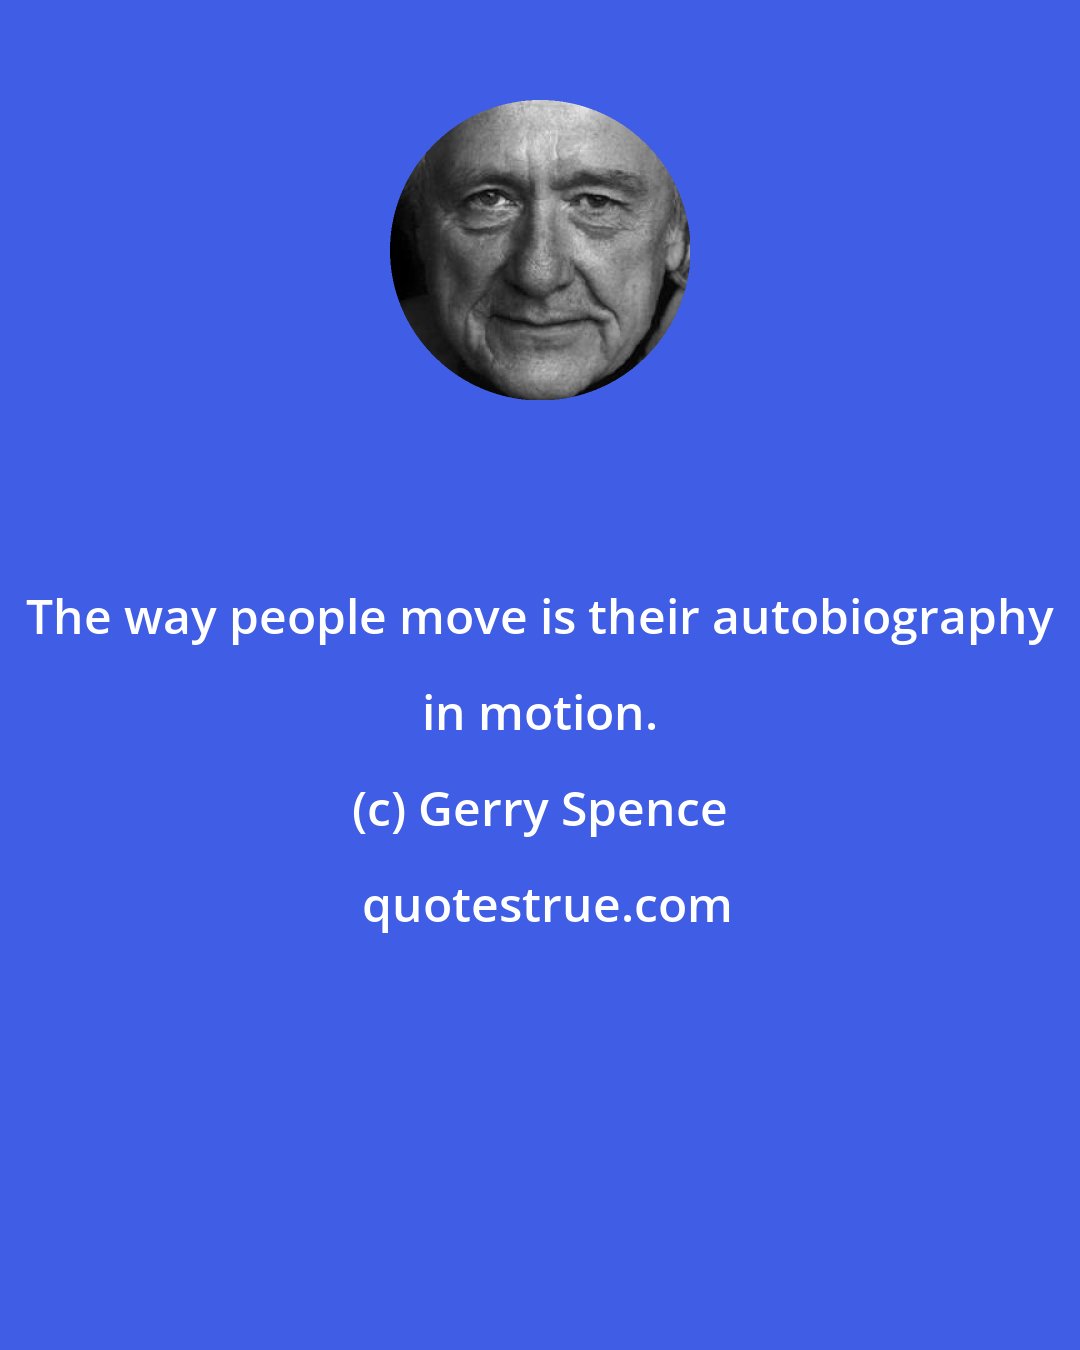 Gerry Spence: The way people move is their autobiography in motion.